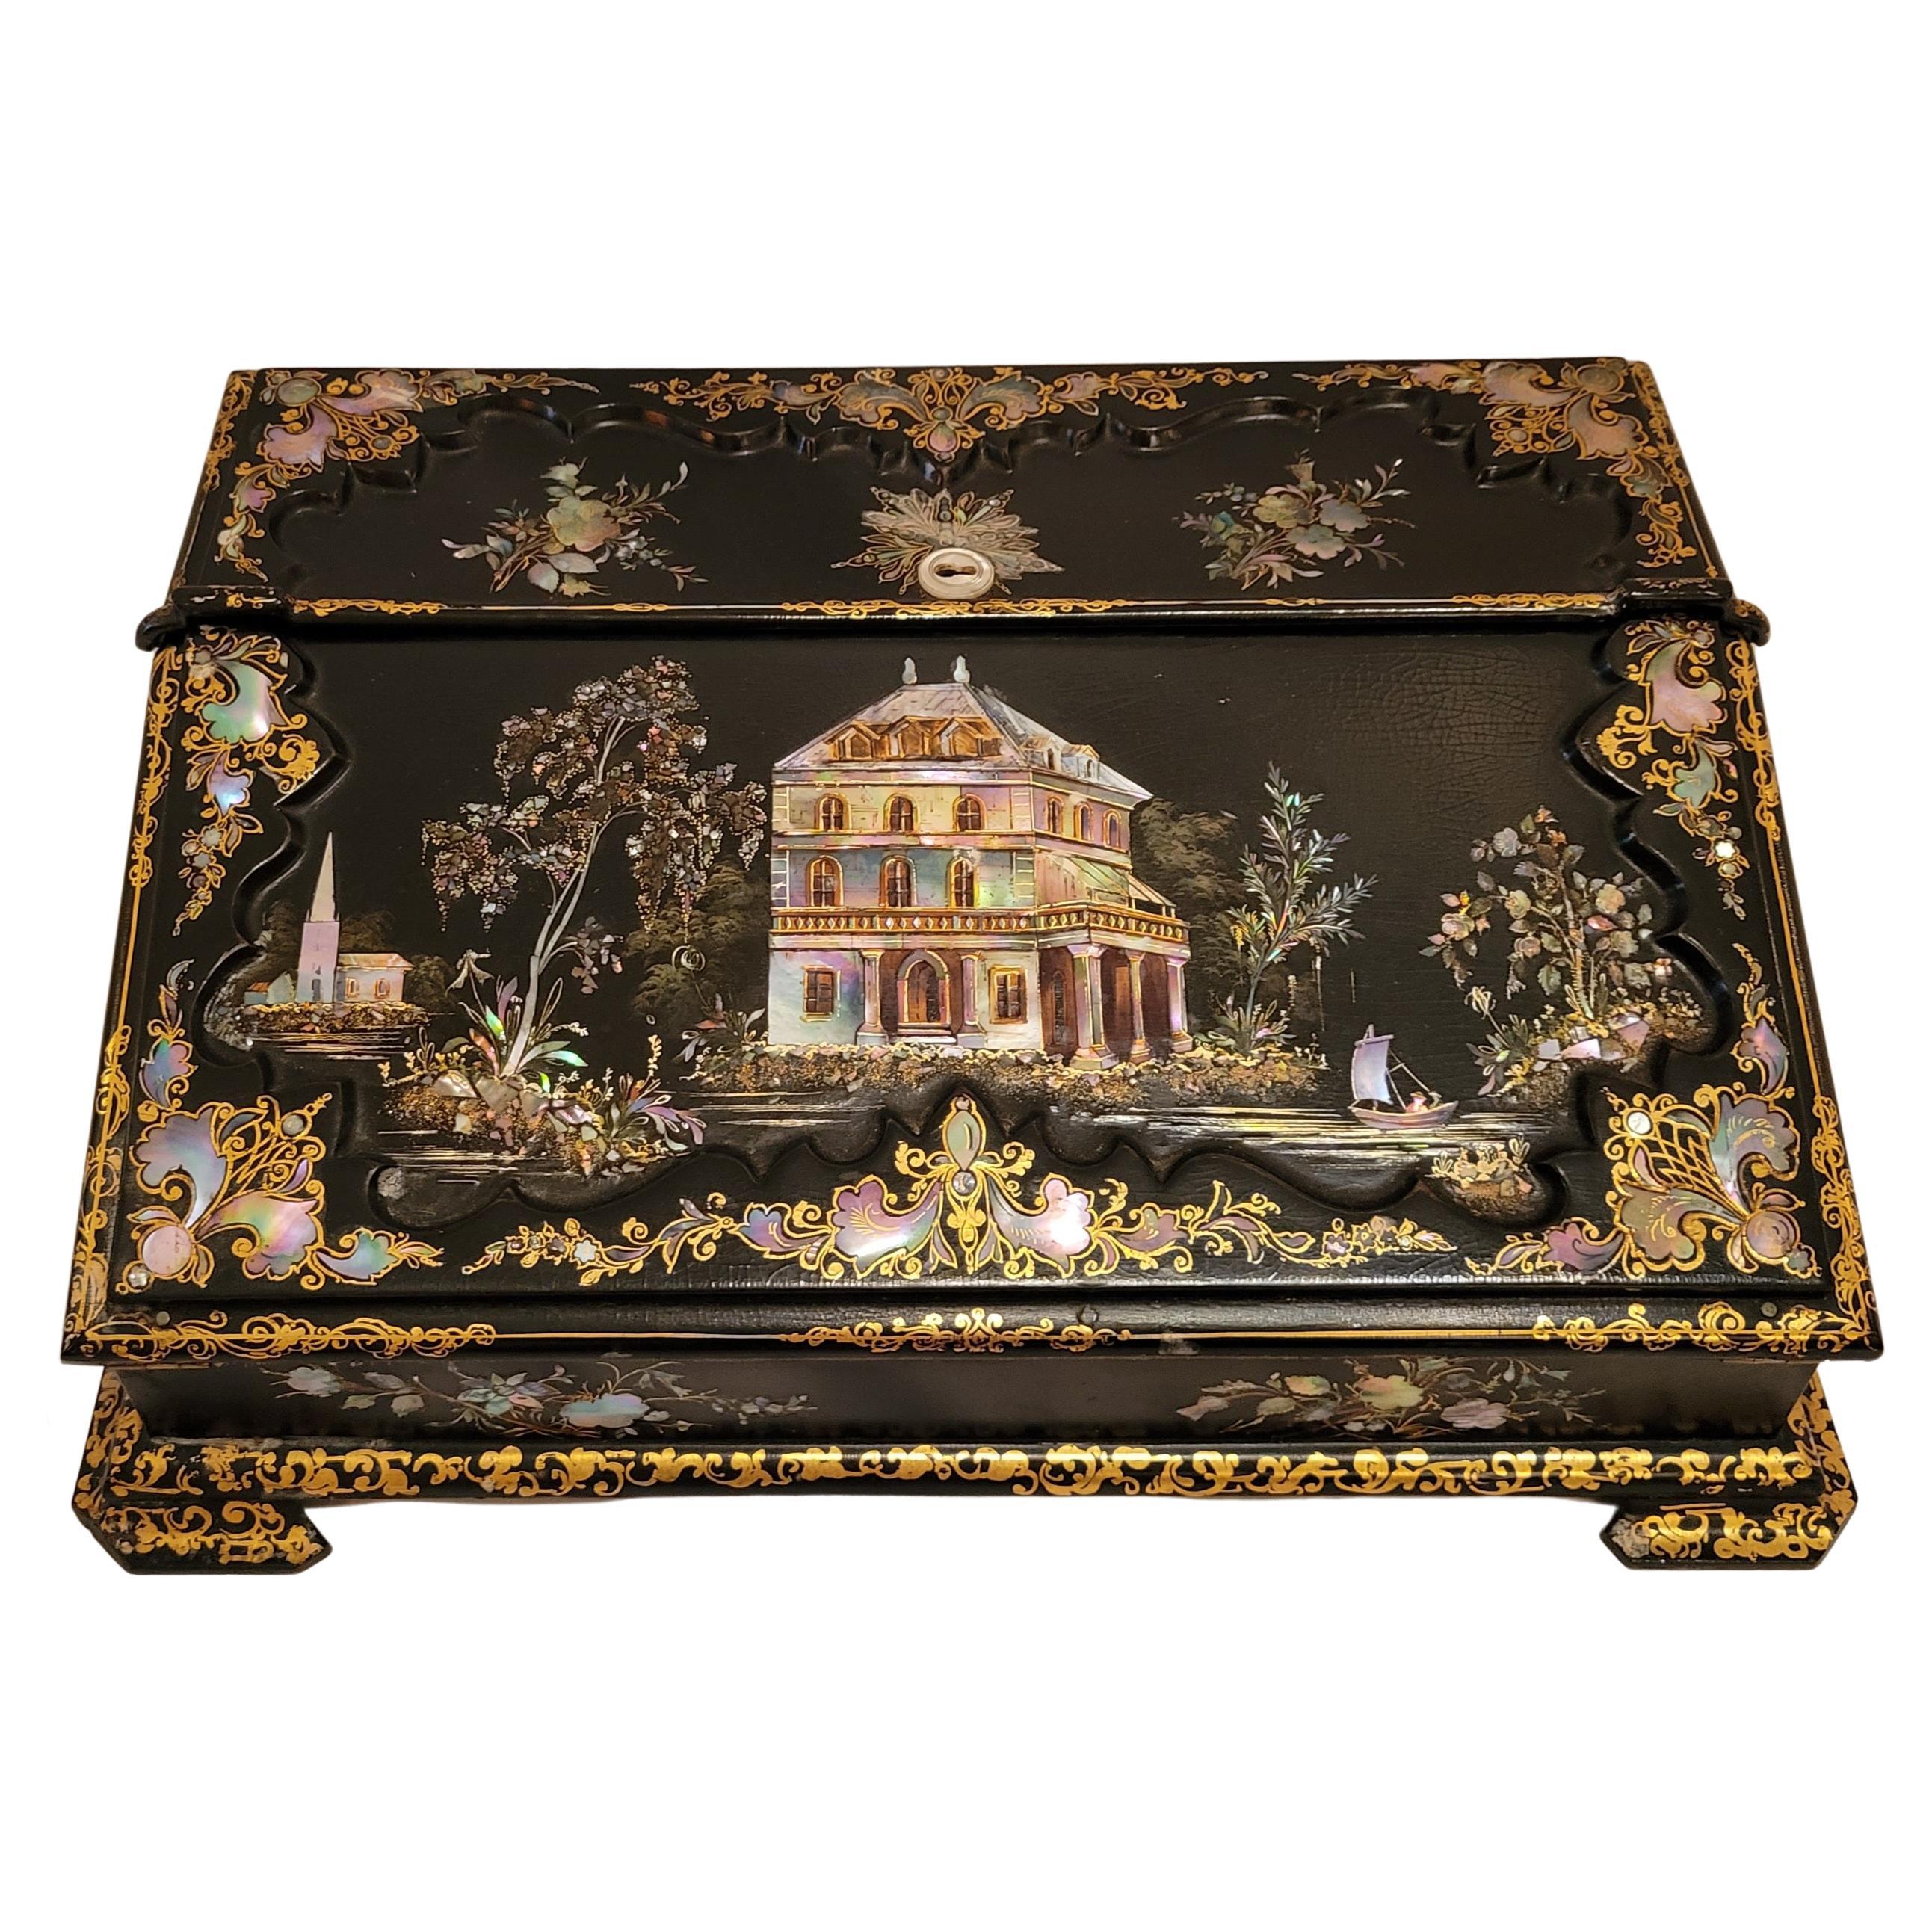 Antique English Exceptional Lacquer Mother-of-Pearl Travel Desk, circa 1860-1870